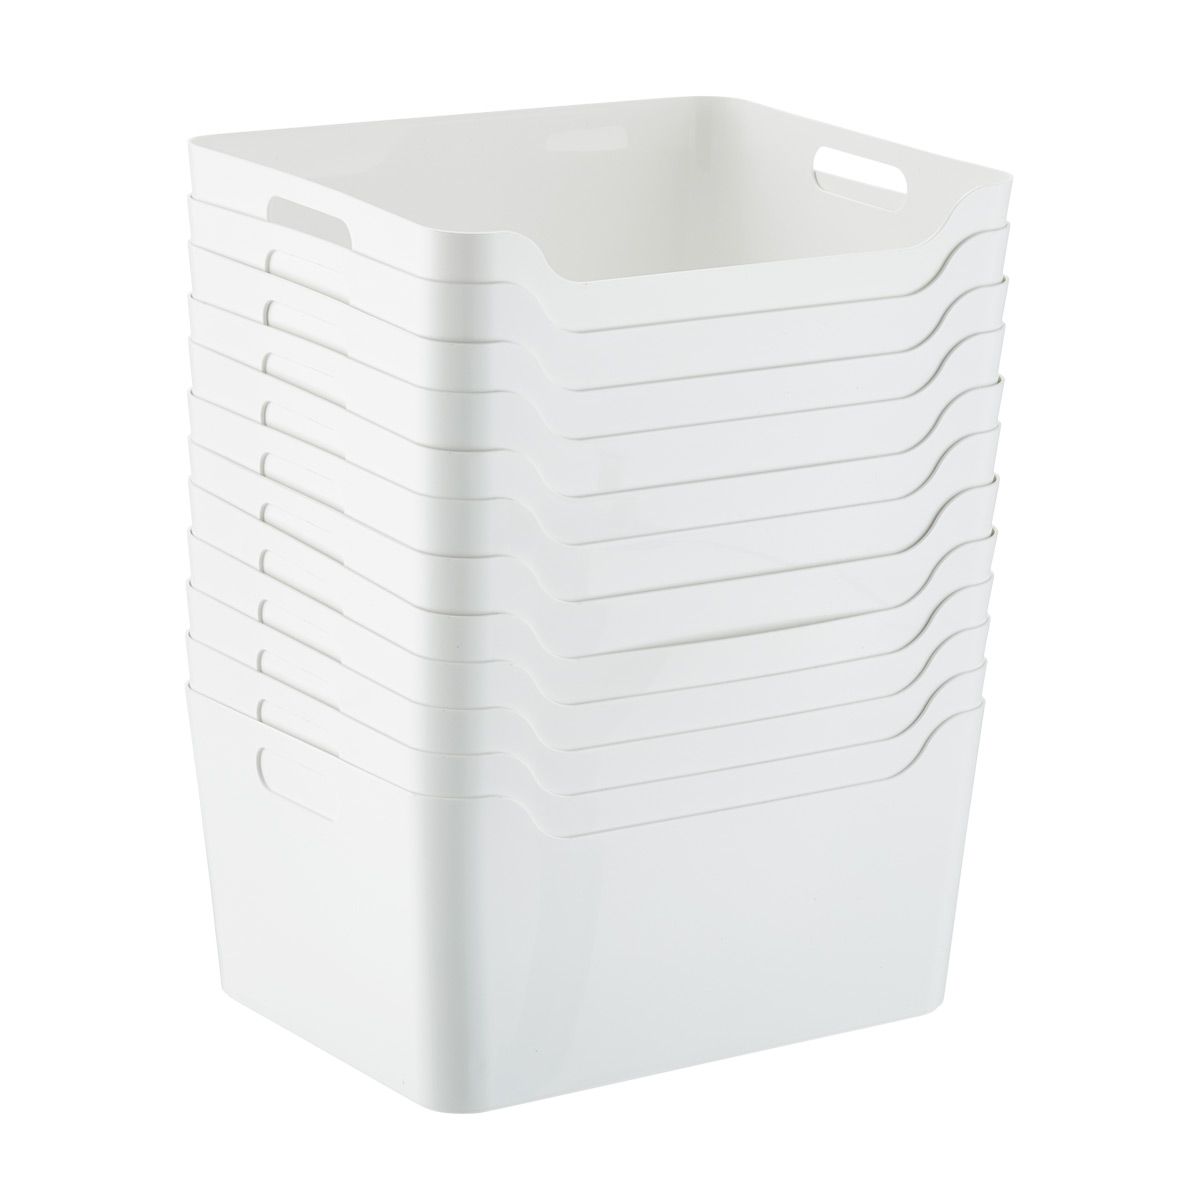 Case of 12 Large Plastic Bins w/ Handles White | The Container Store